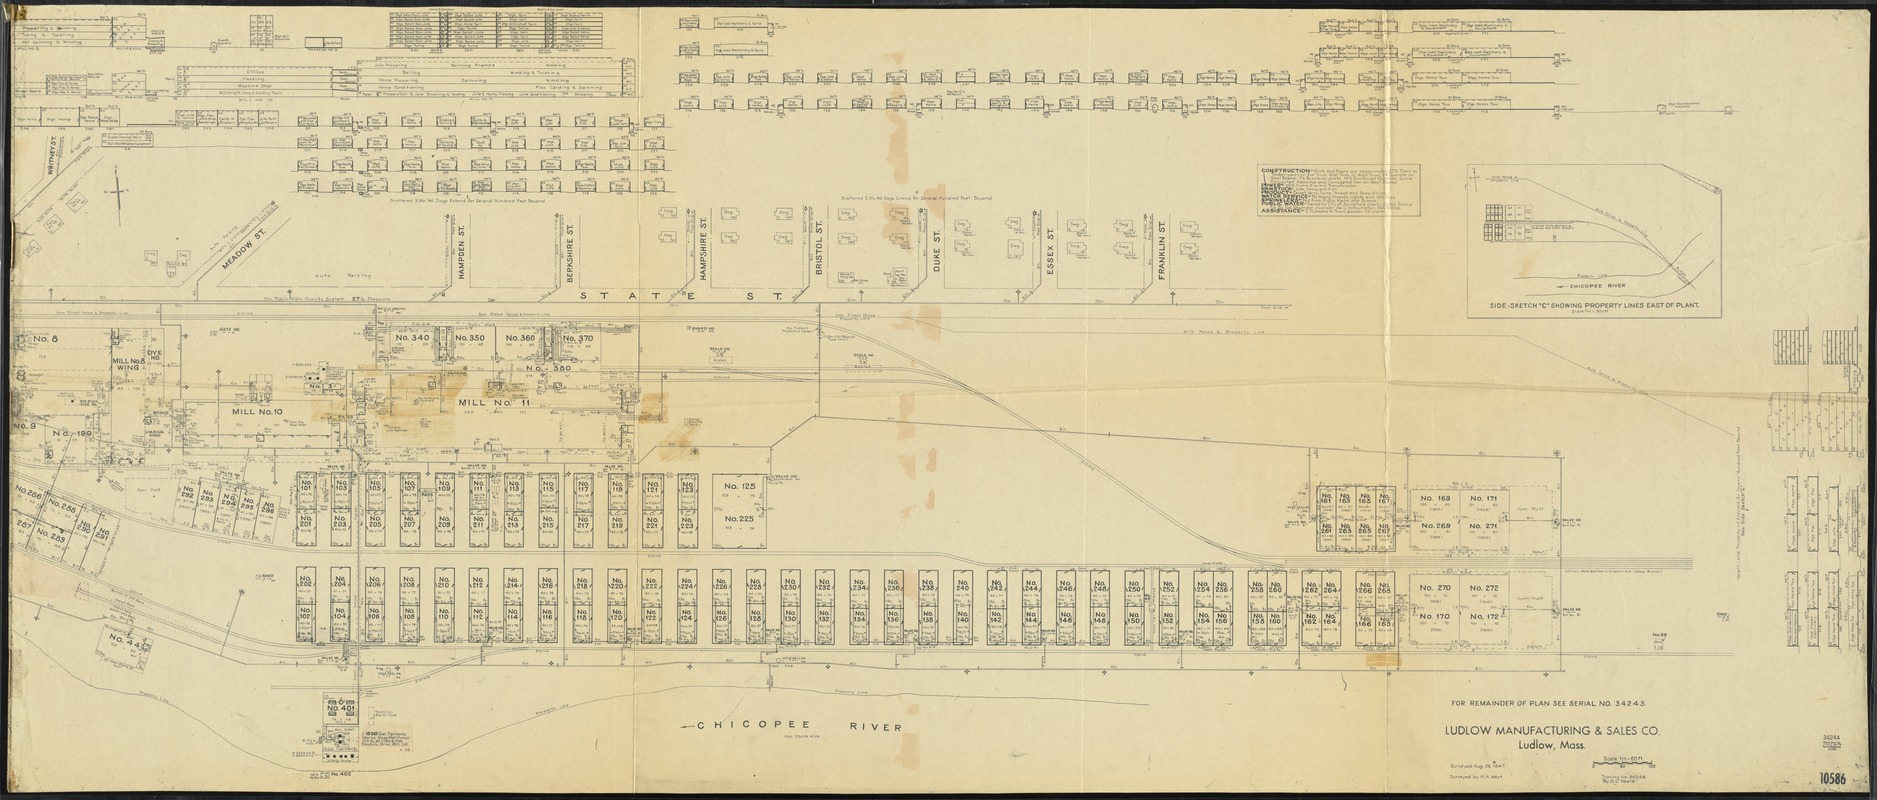 Ludlow Manufacturing & Sales Co., Ludlow, Mass. [insurance map]